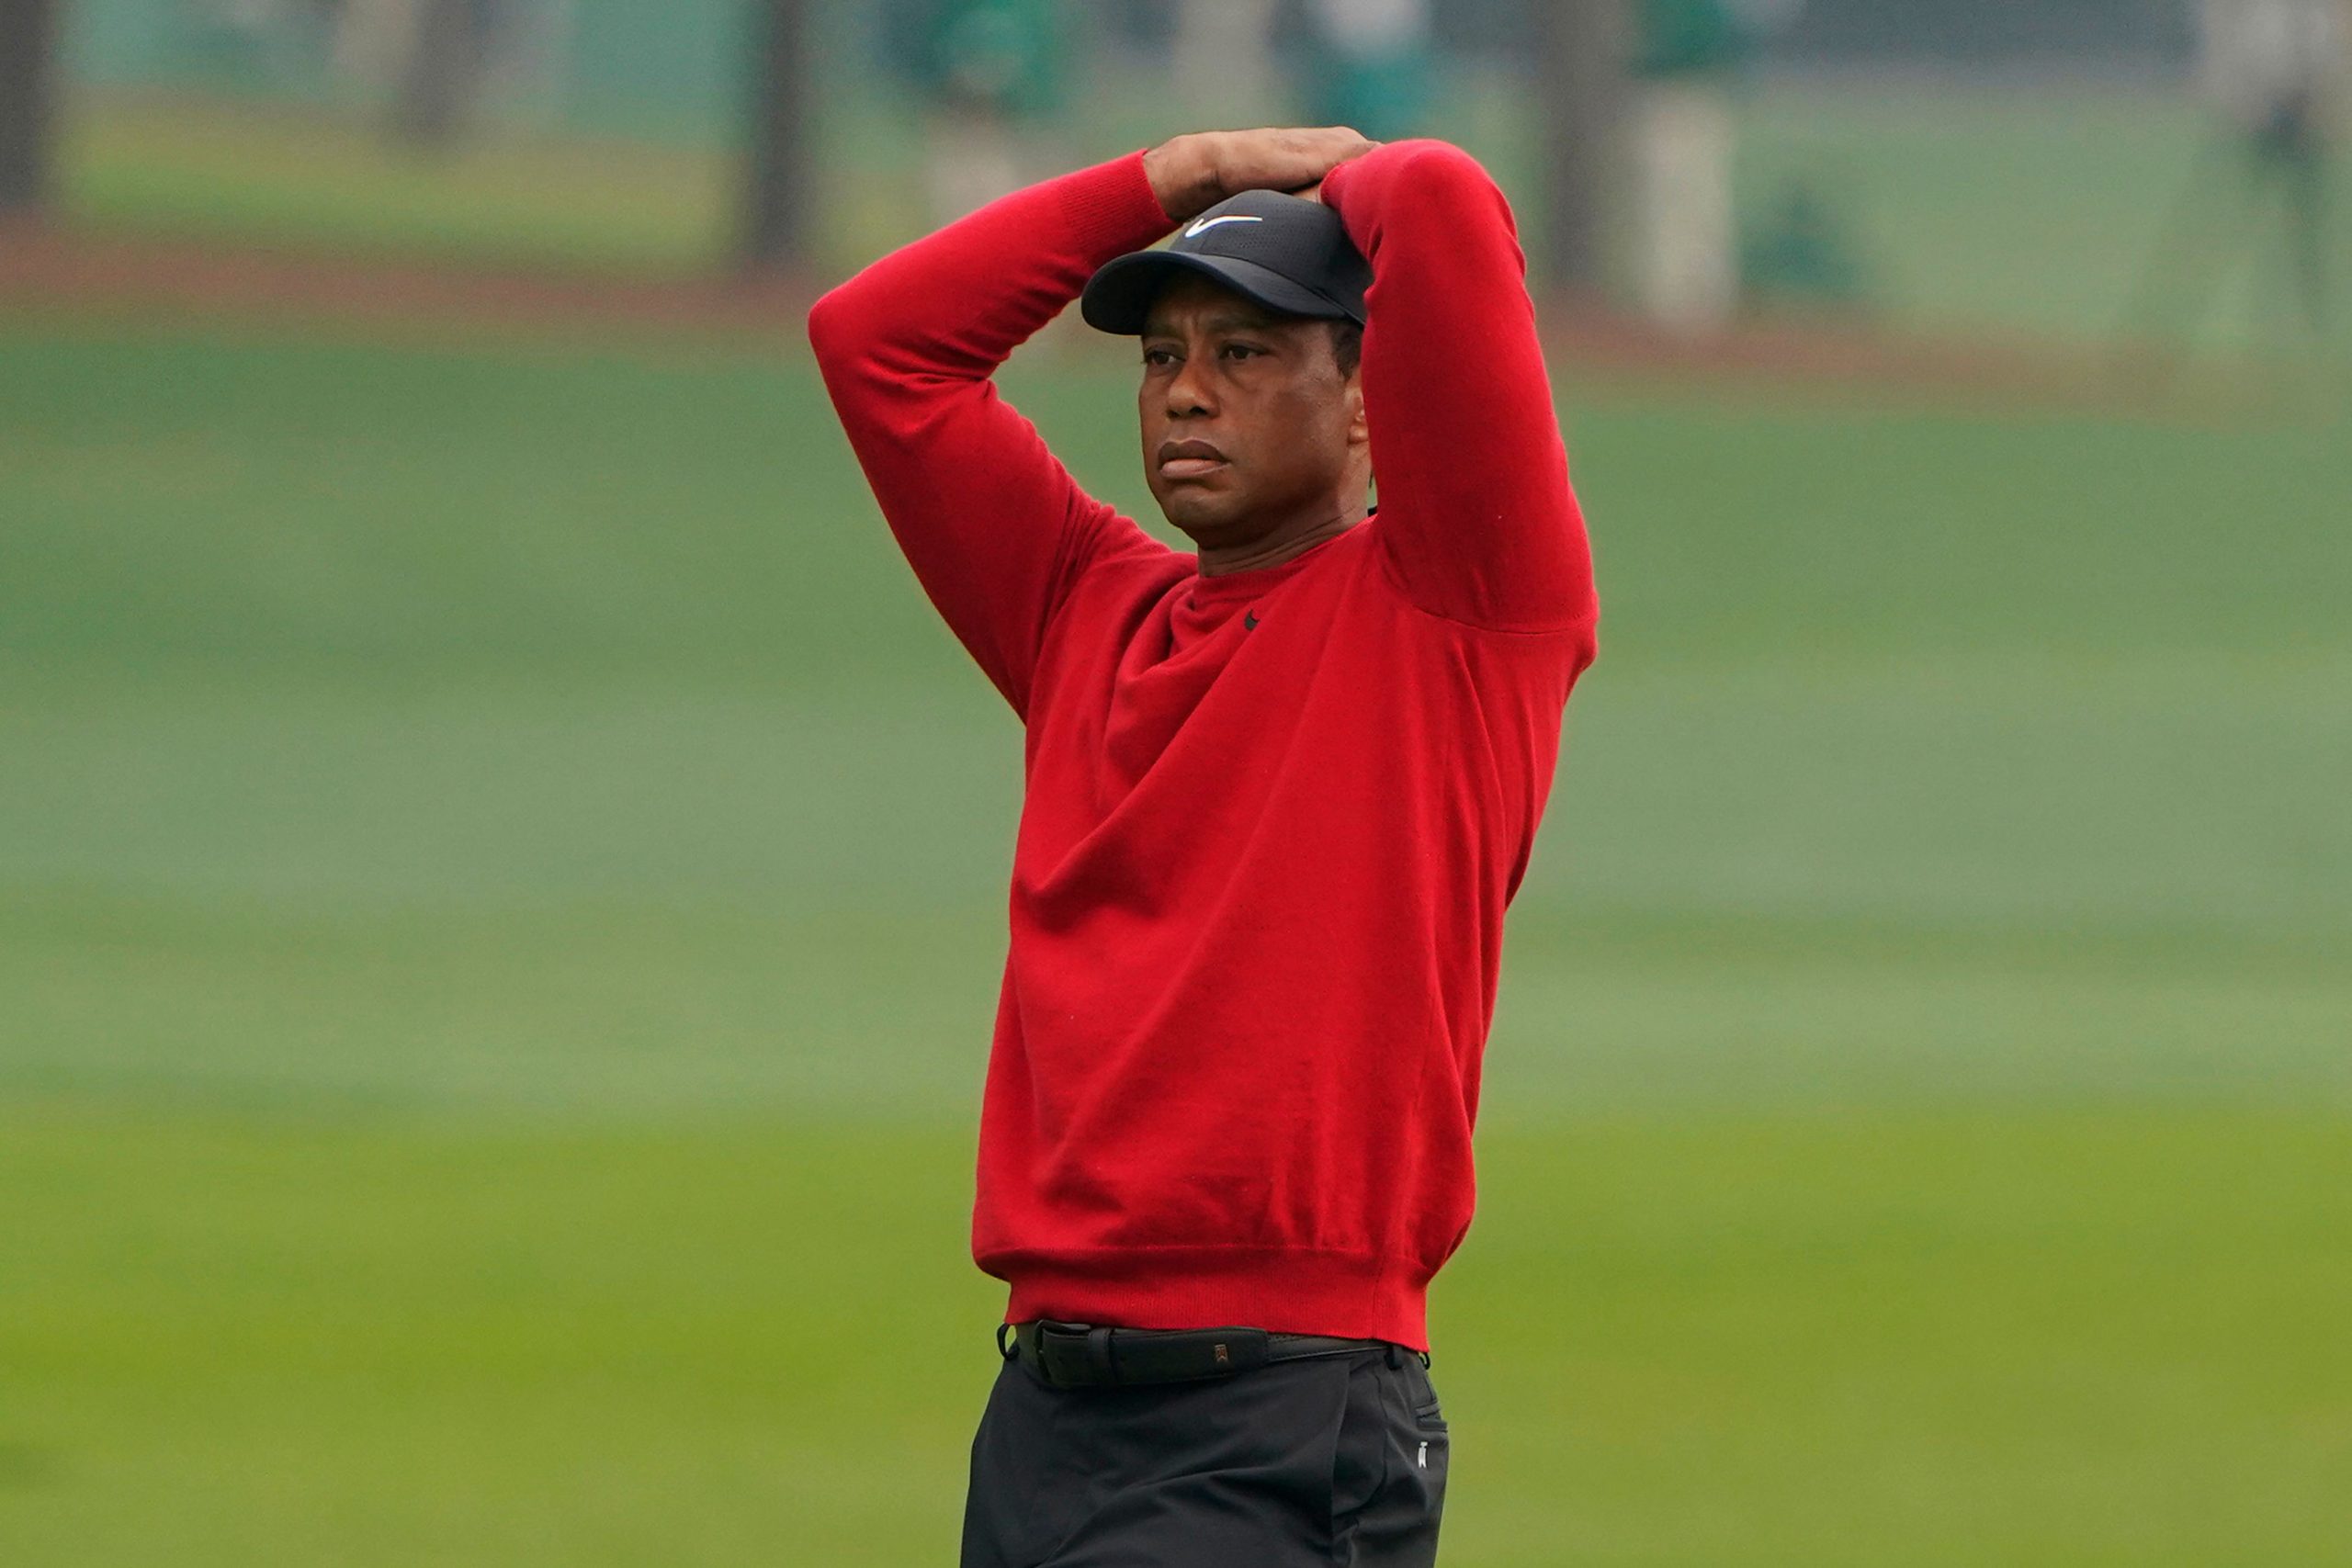 Tiger Woods’ freak car crash injuries may not allow him to compete at top level again